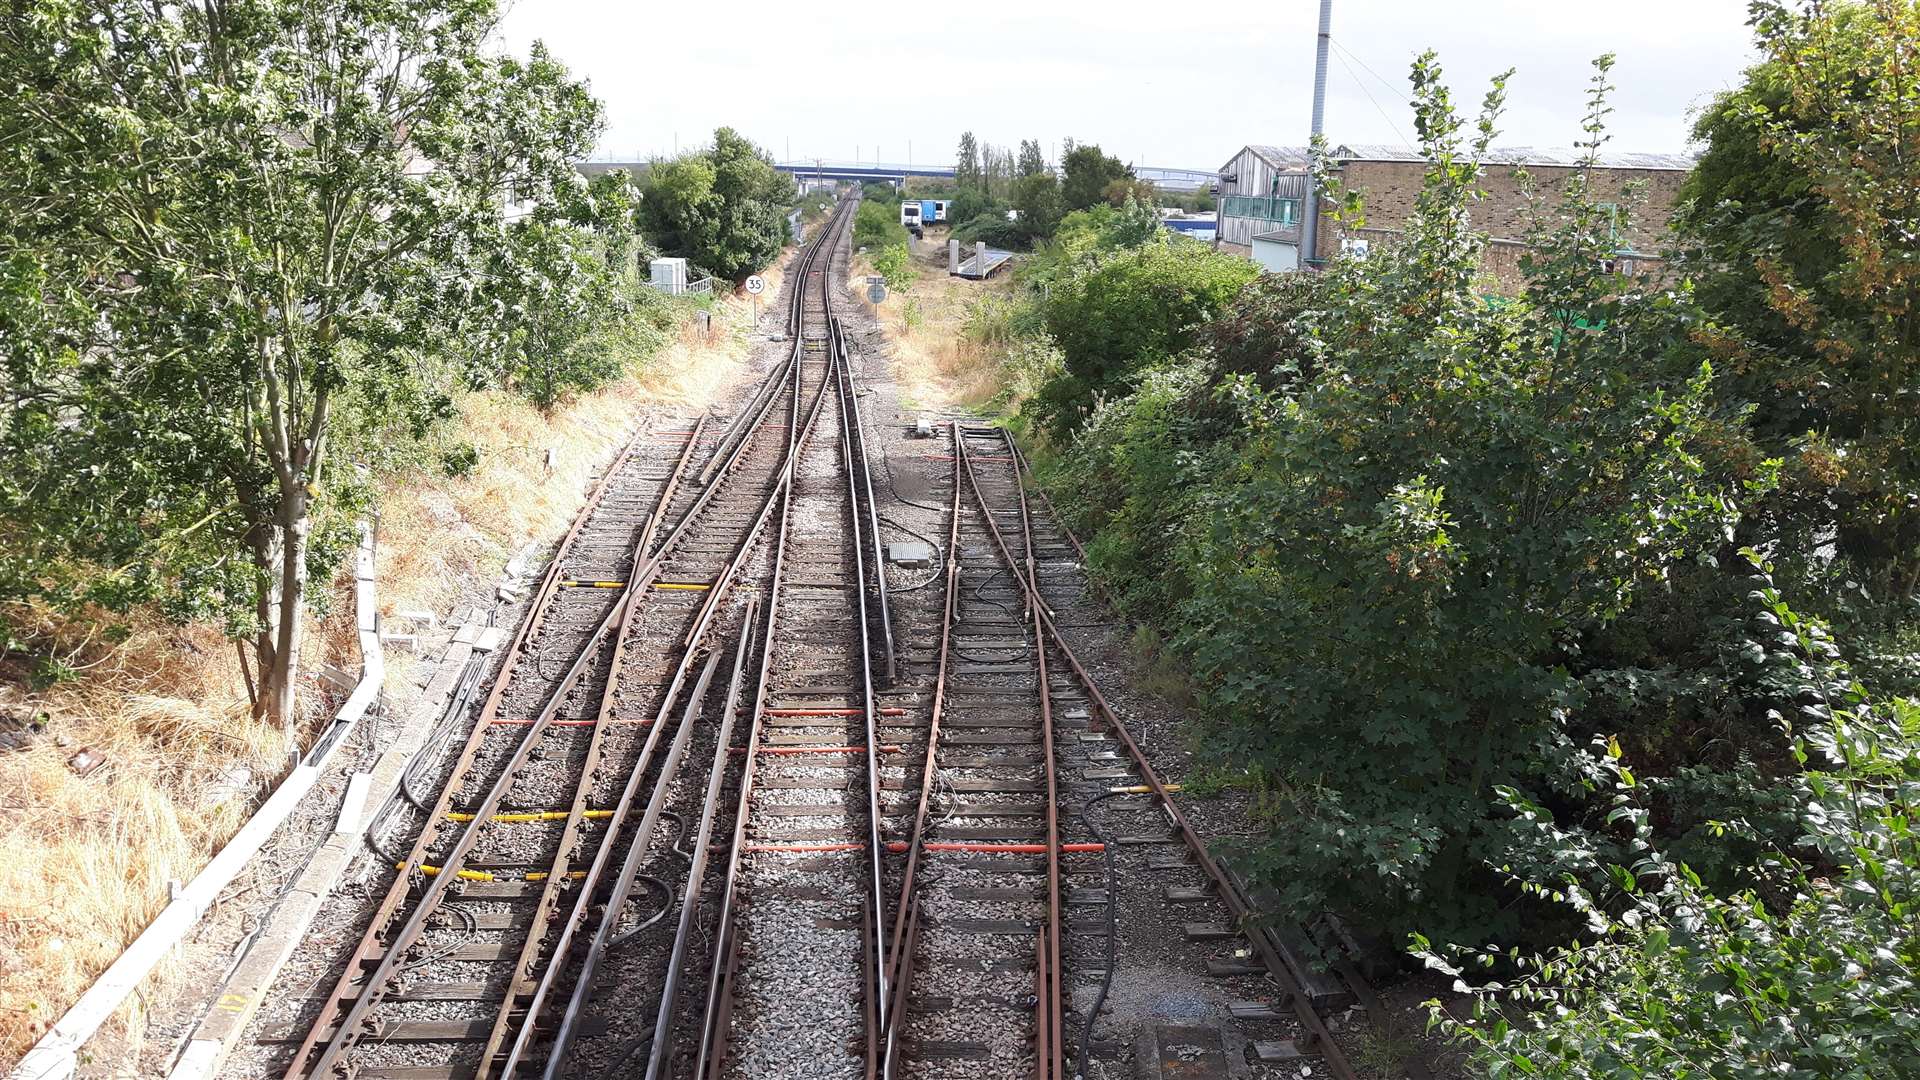 Railway lines at Queenborough, station Sheppey (3666927)